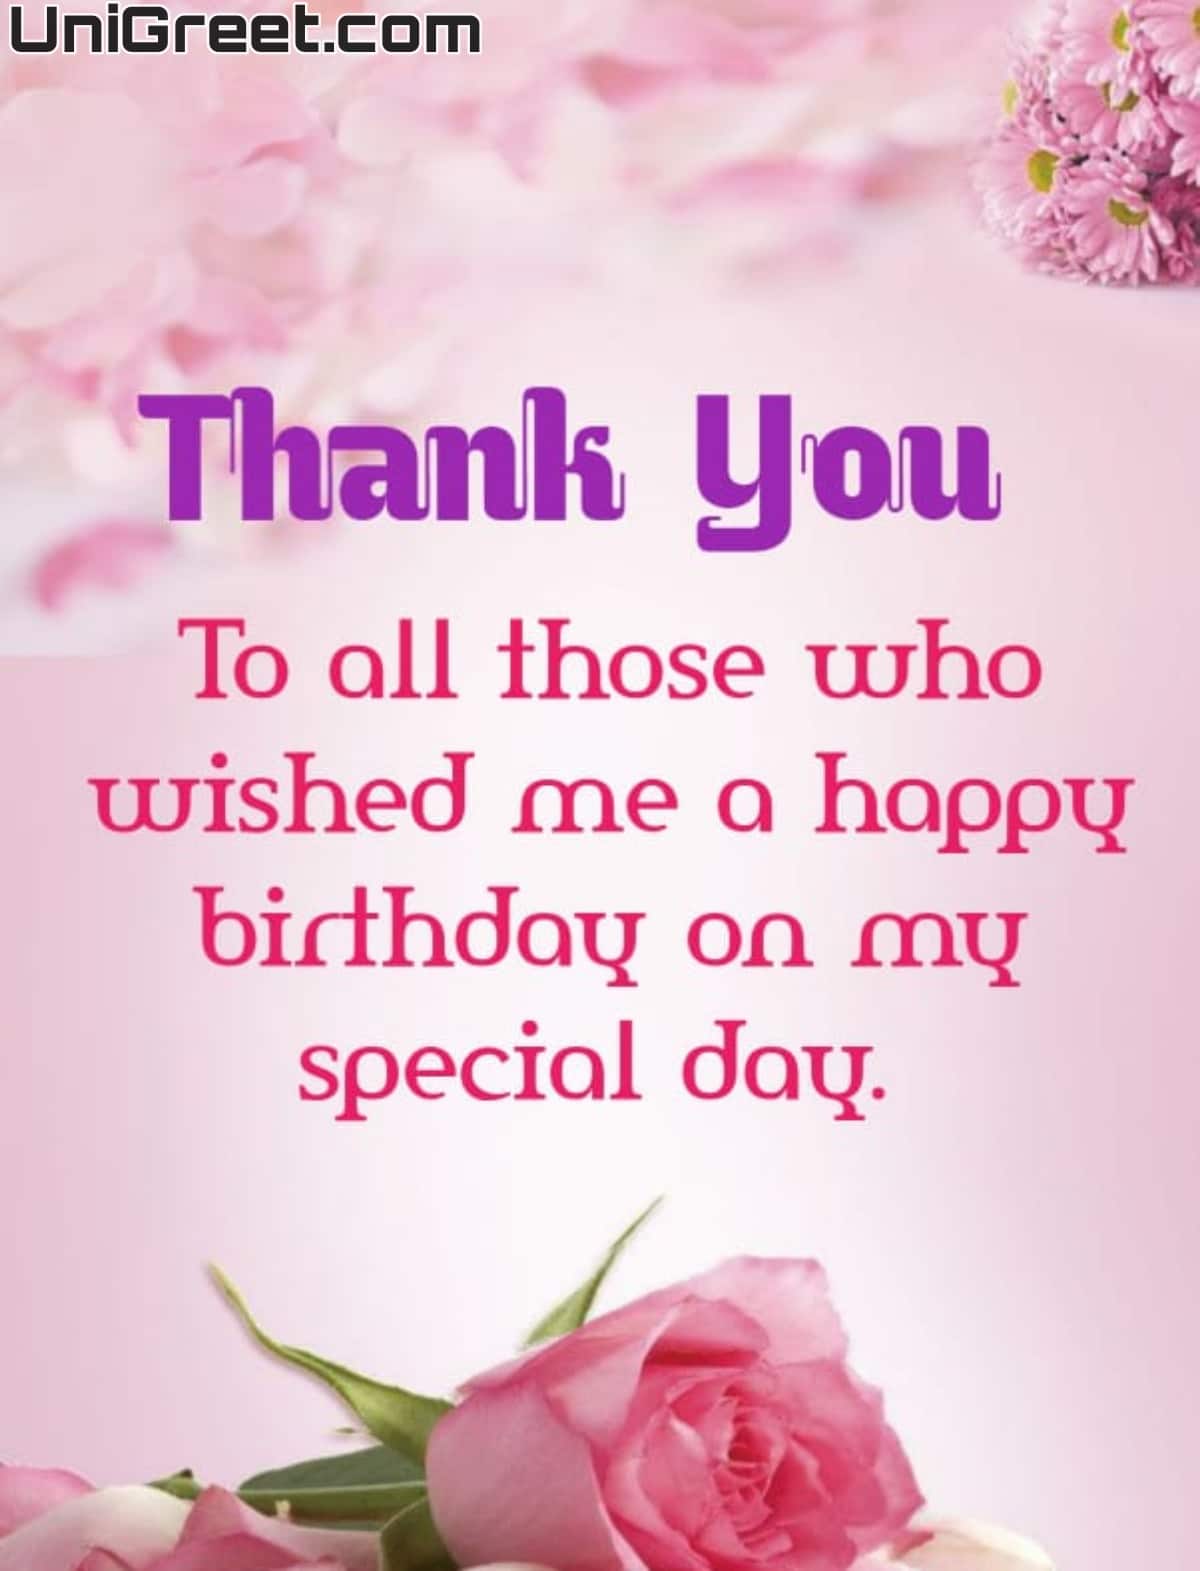 50 Thanks For Birthday Wishes Images | Thank You Messages For Birthday ...